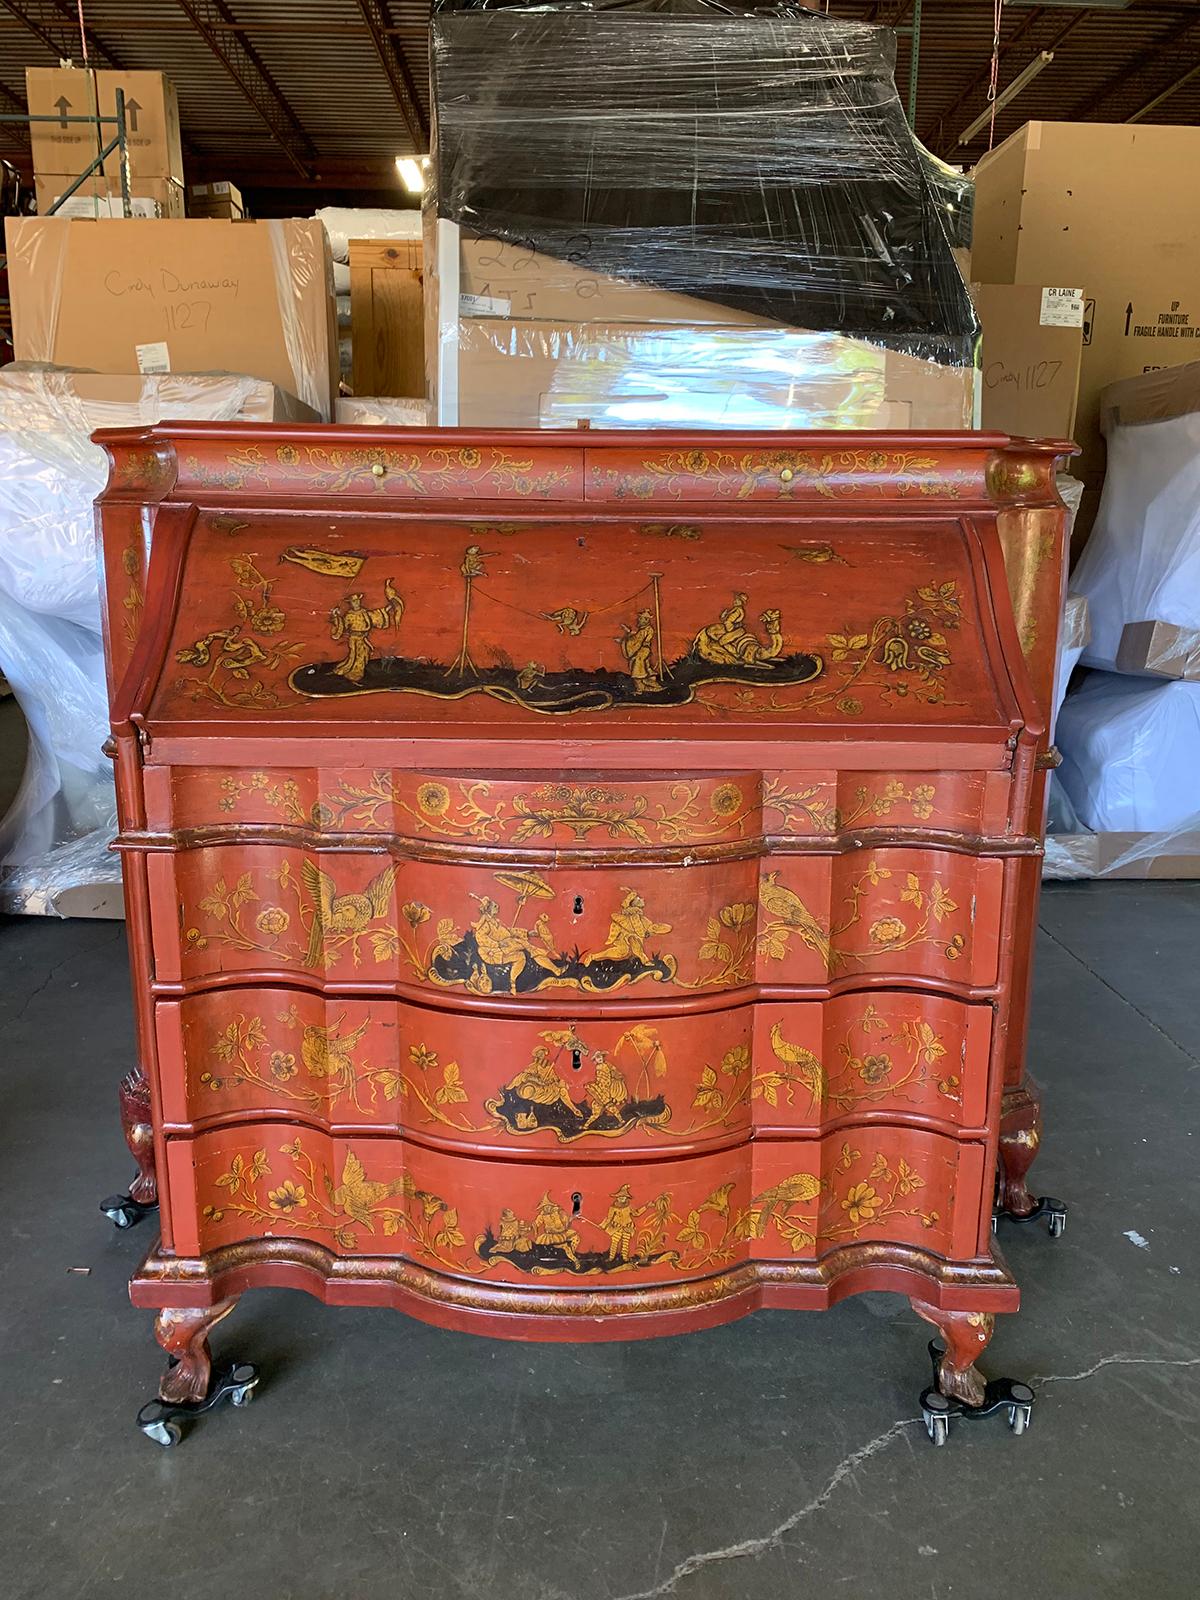 Hand-Painted 18th-19th Century Italian Red Chinoiserie Secretary For Sale